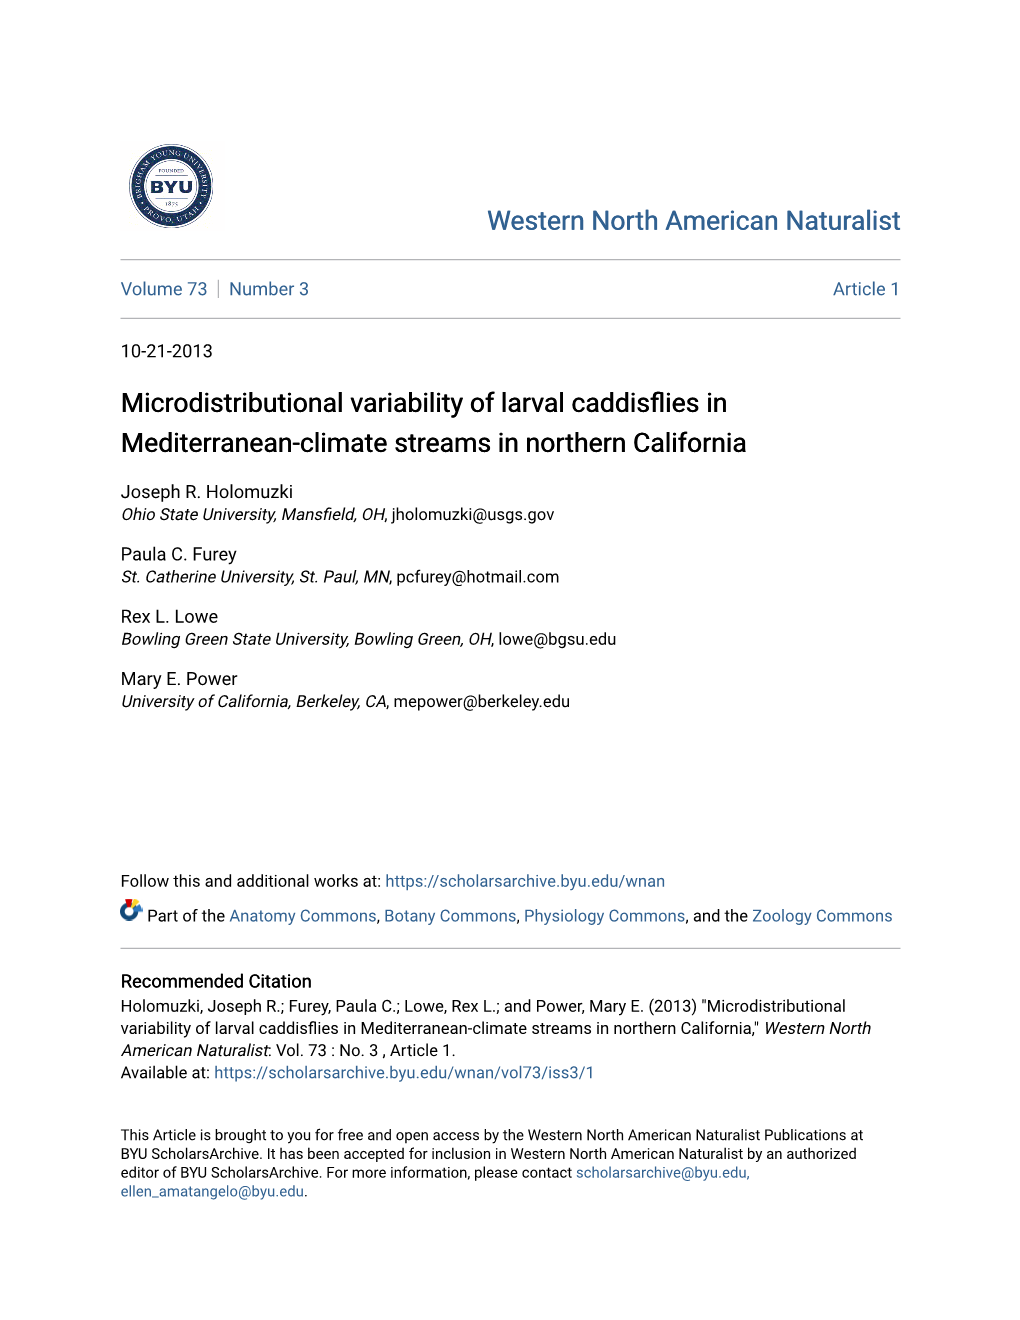 Microdistributional Variability of Larval Caddisflies in Mediterranean-Climate Streams in Northern California